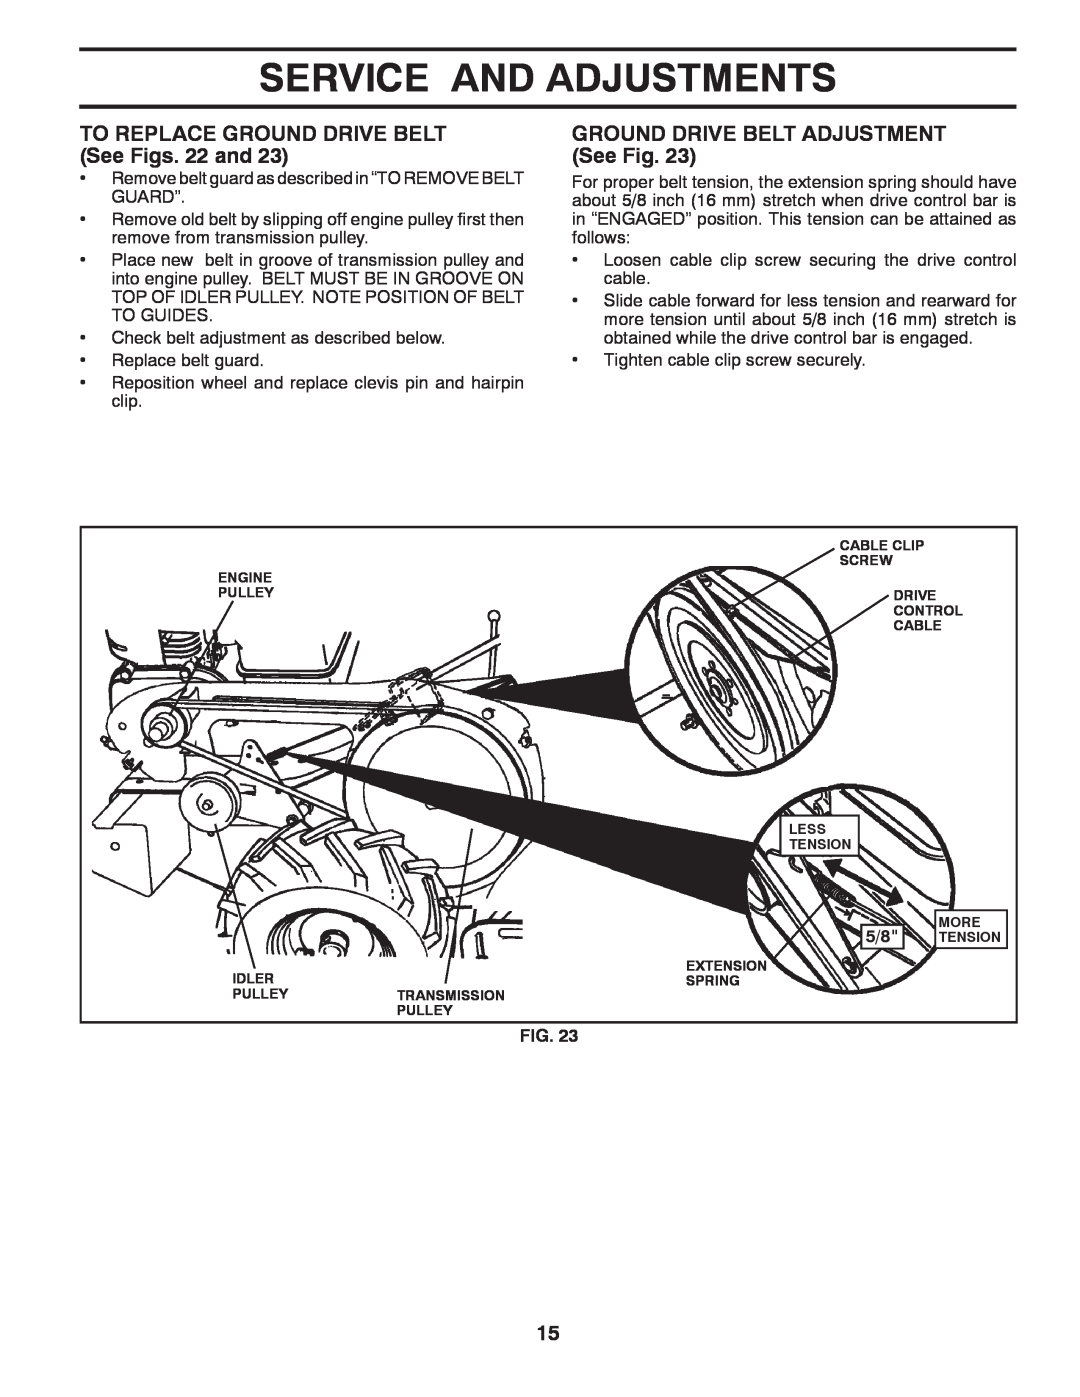 Poulan PRRT850 manual TO REPLACE GROUND DRIVE BELT See Figs. 22 and, GROUND DRIVE BELT ADJUSTMENT See Fig 